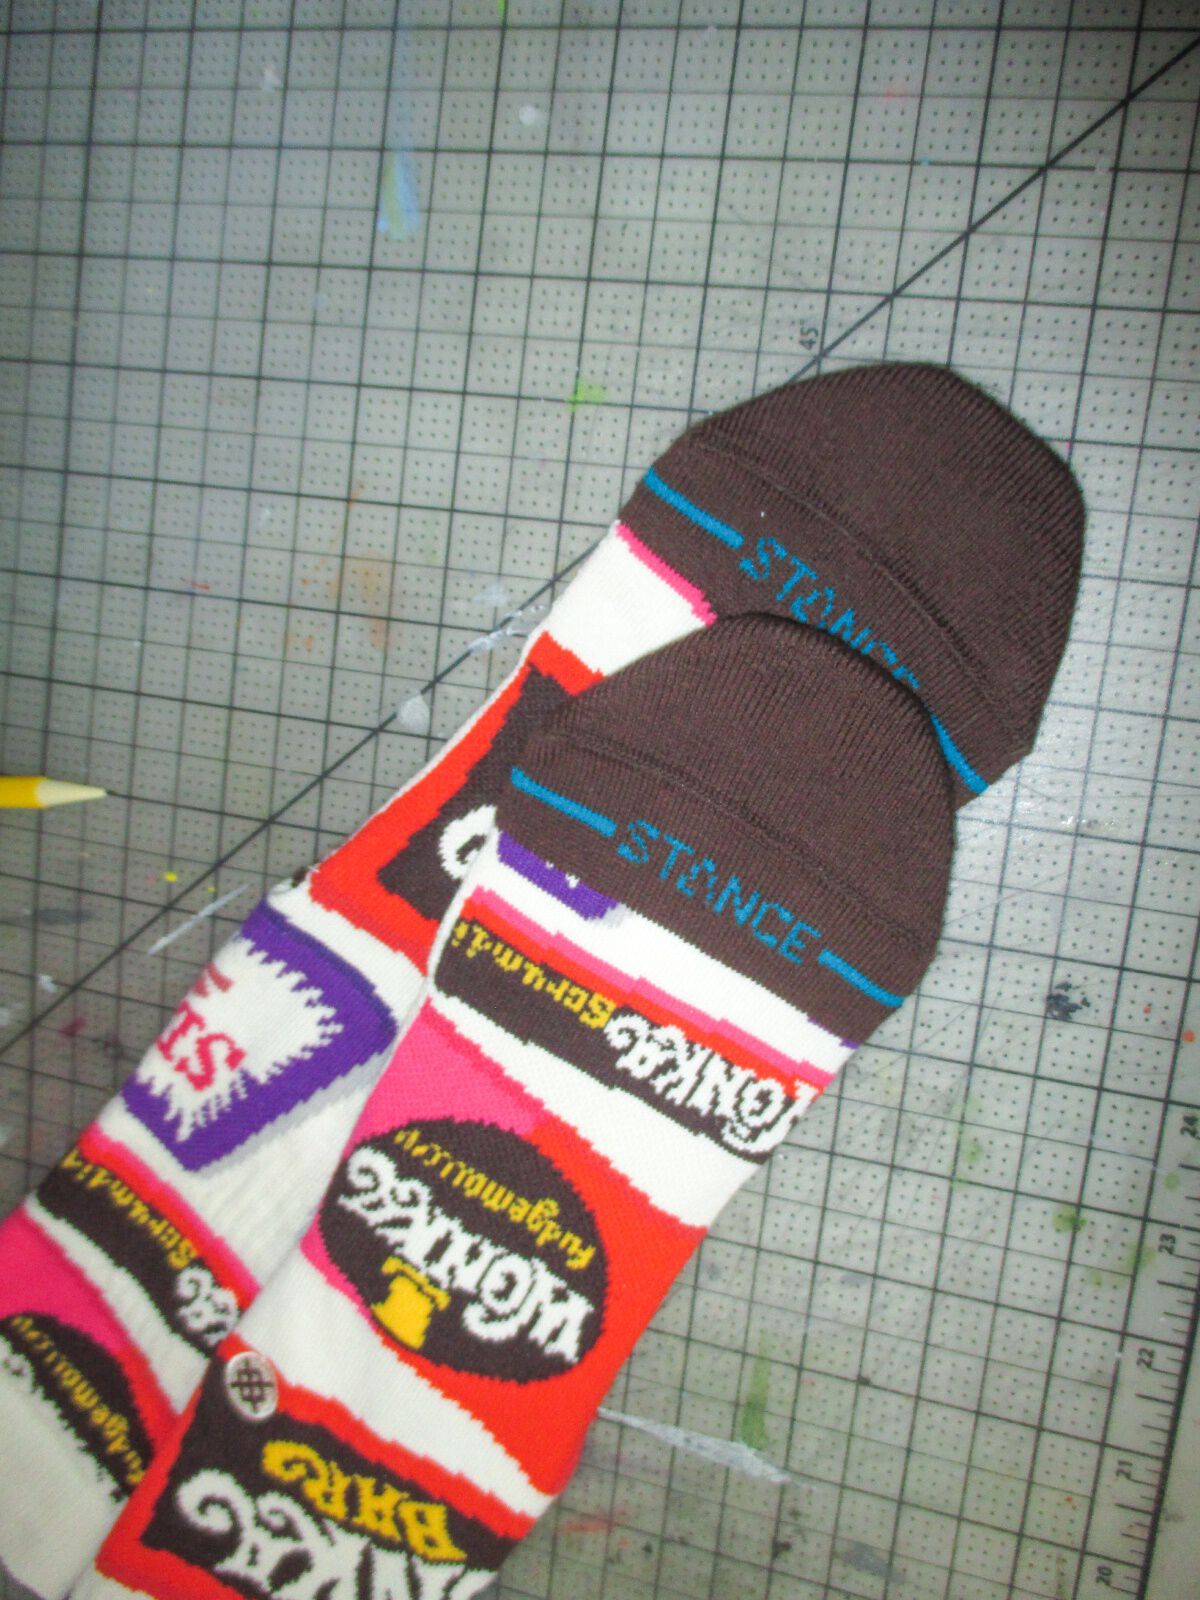 Willy Wonka x Stance socks layered on top of a grid background